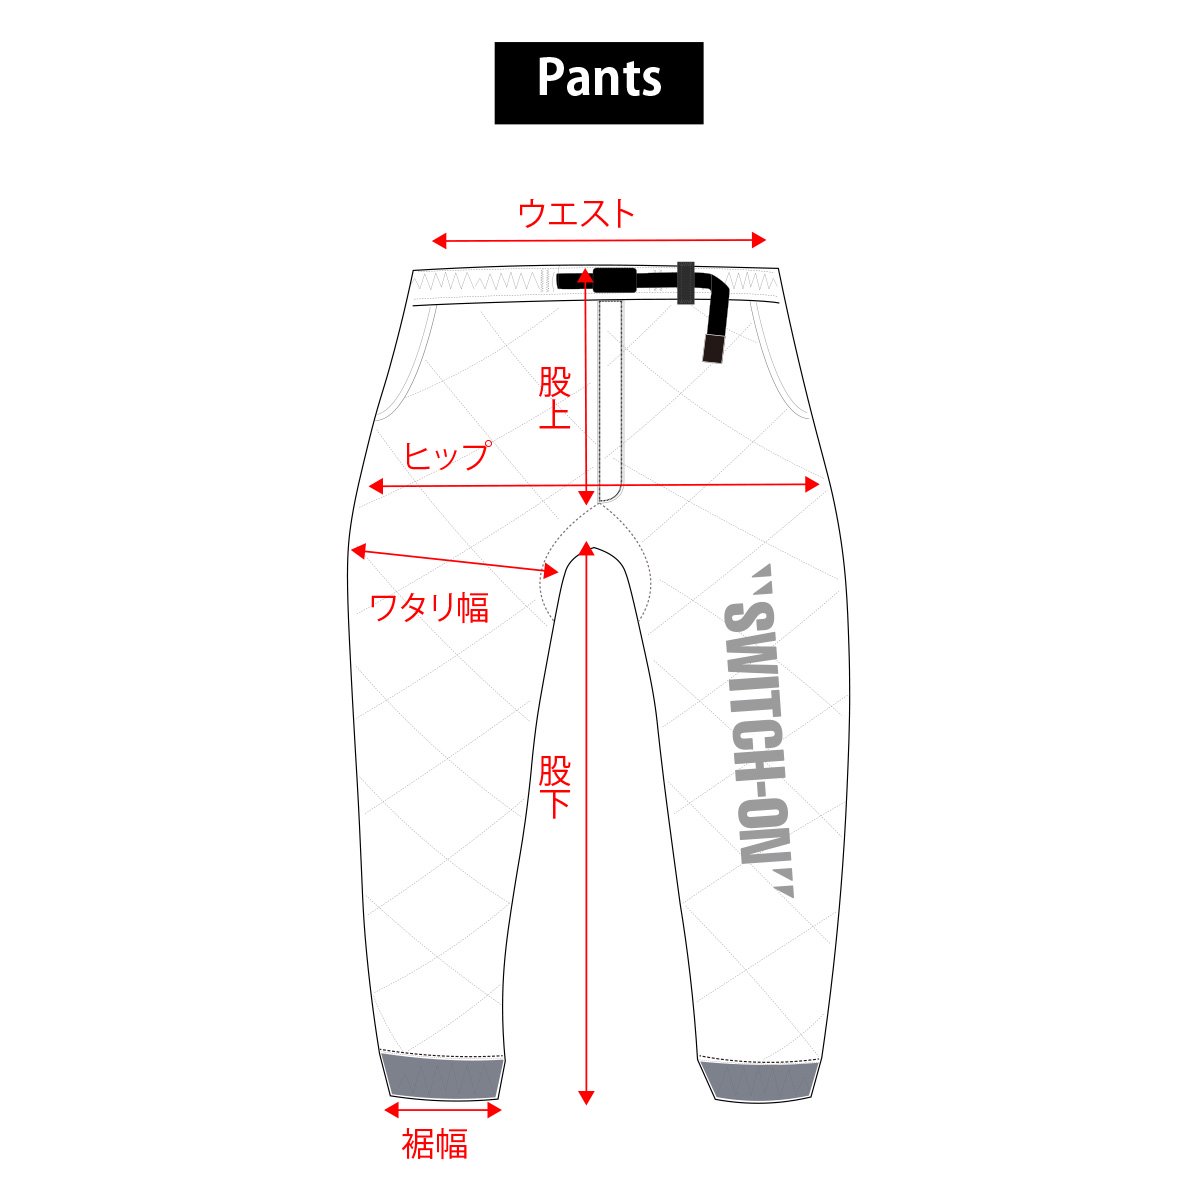 <img class='new_mark_img1' src='https://img.shop-pro.jp/img/new/icons15.gif' style='border:none;display:inline;margin:0px;padding:0px;width:auto;' />EZ quilt pants